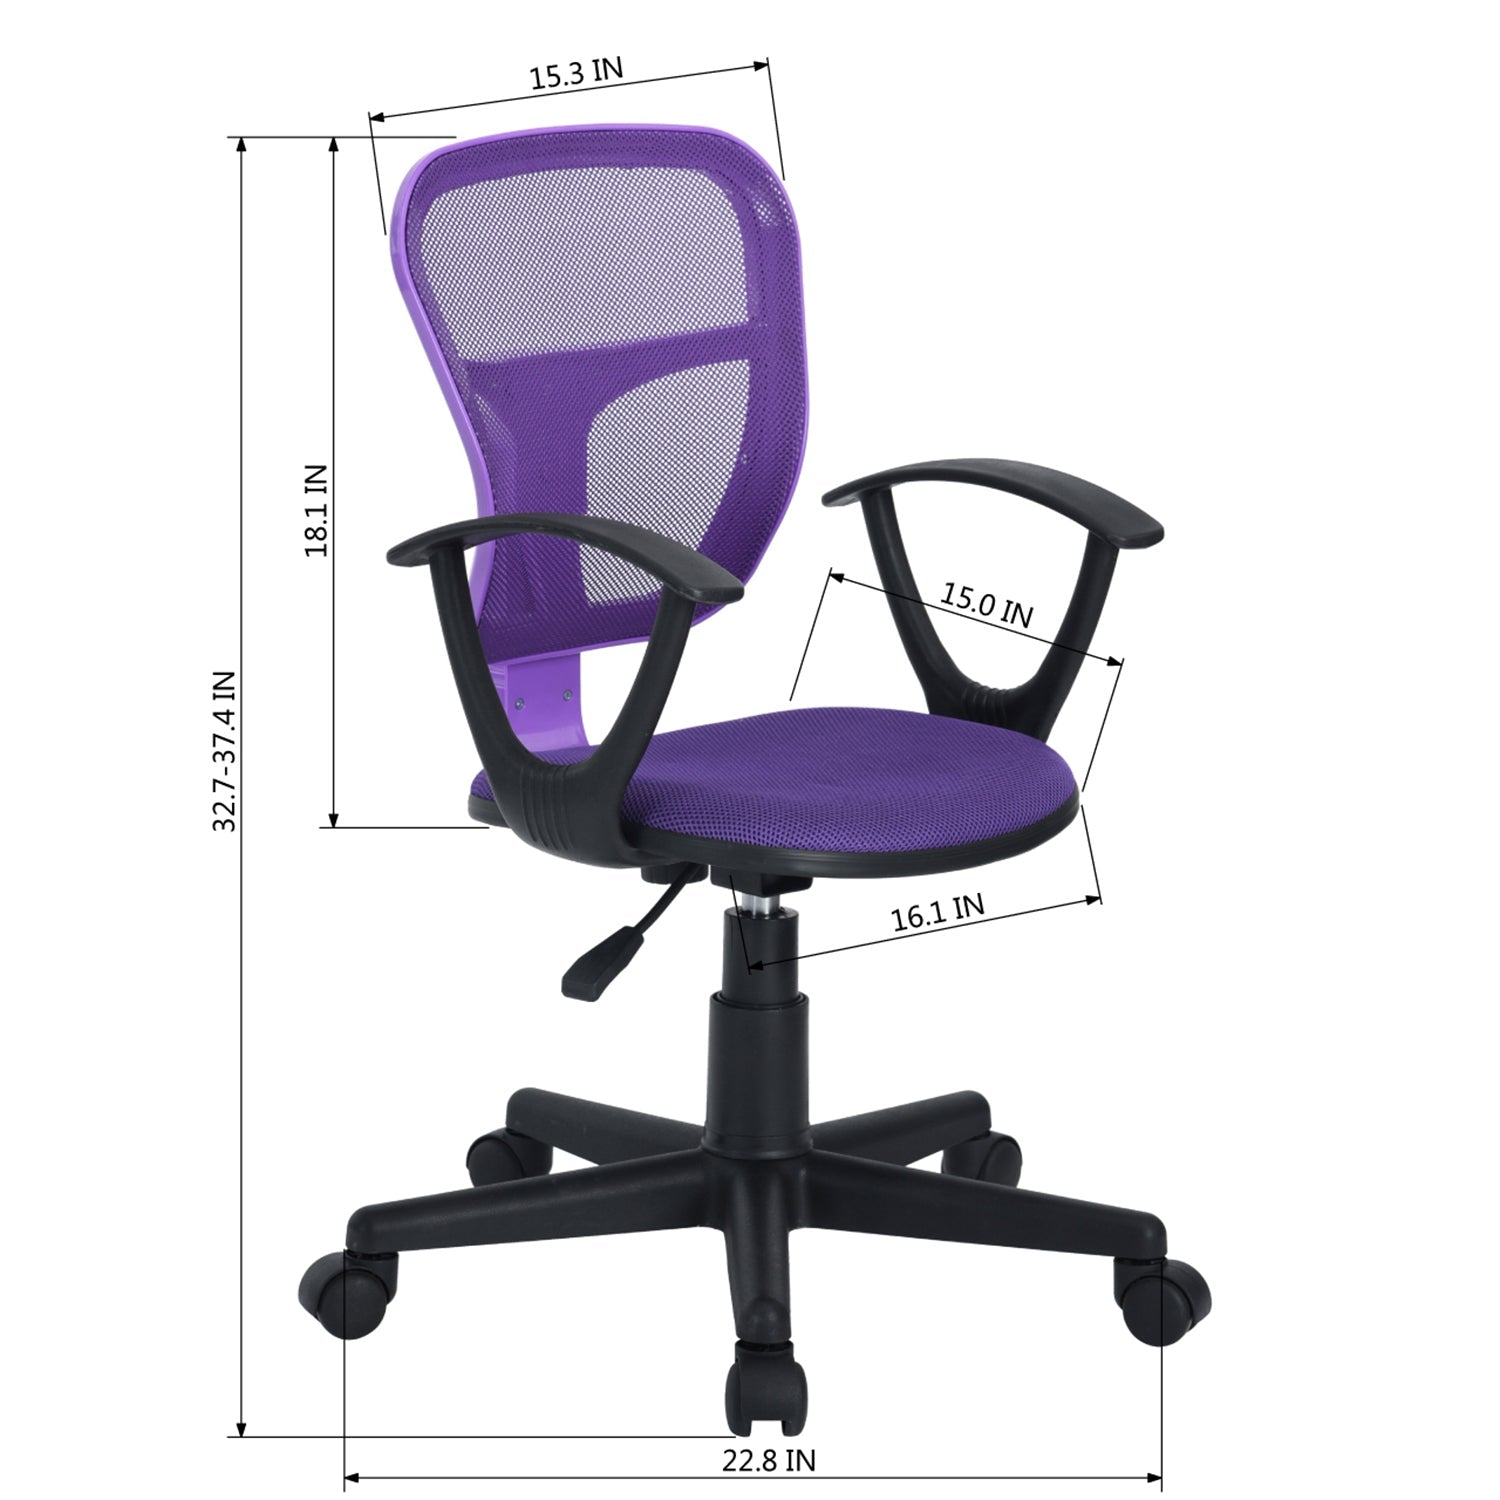 Flying Arm Fabric Office Chair